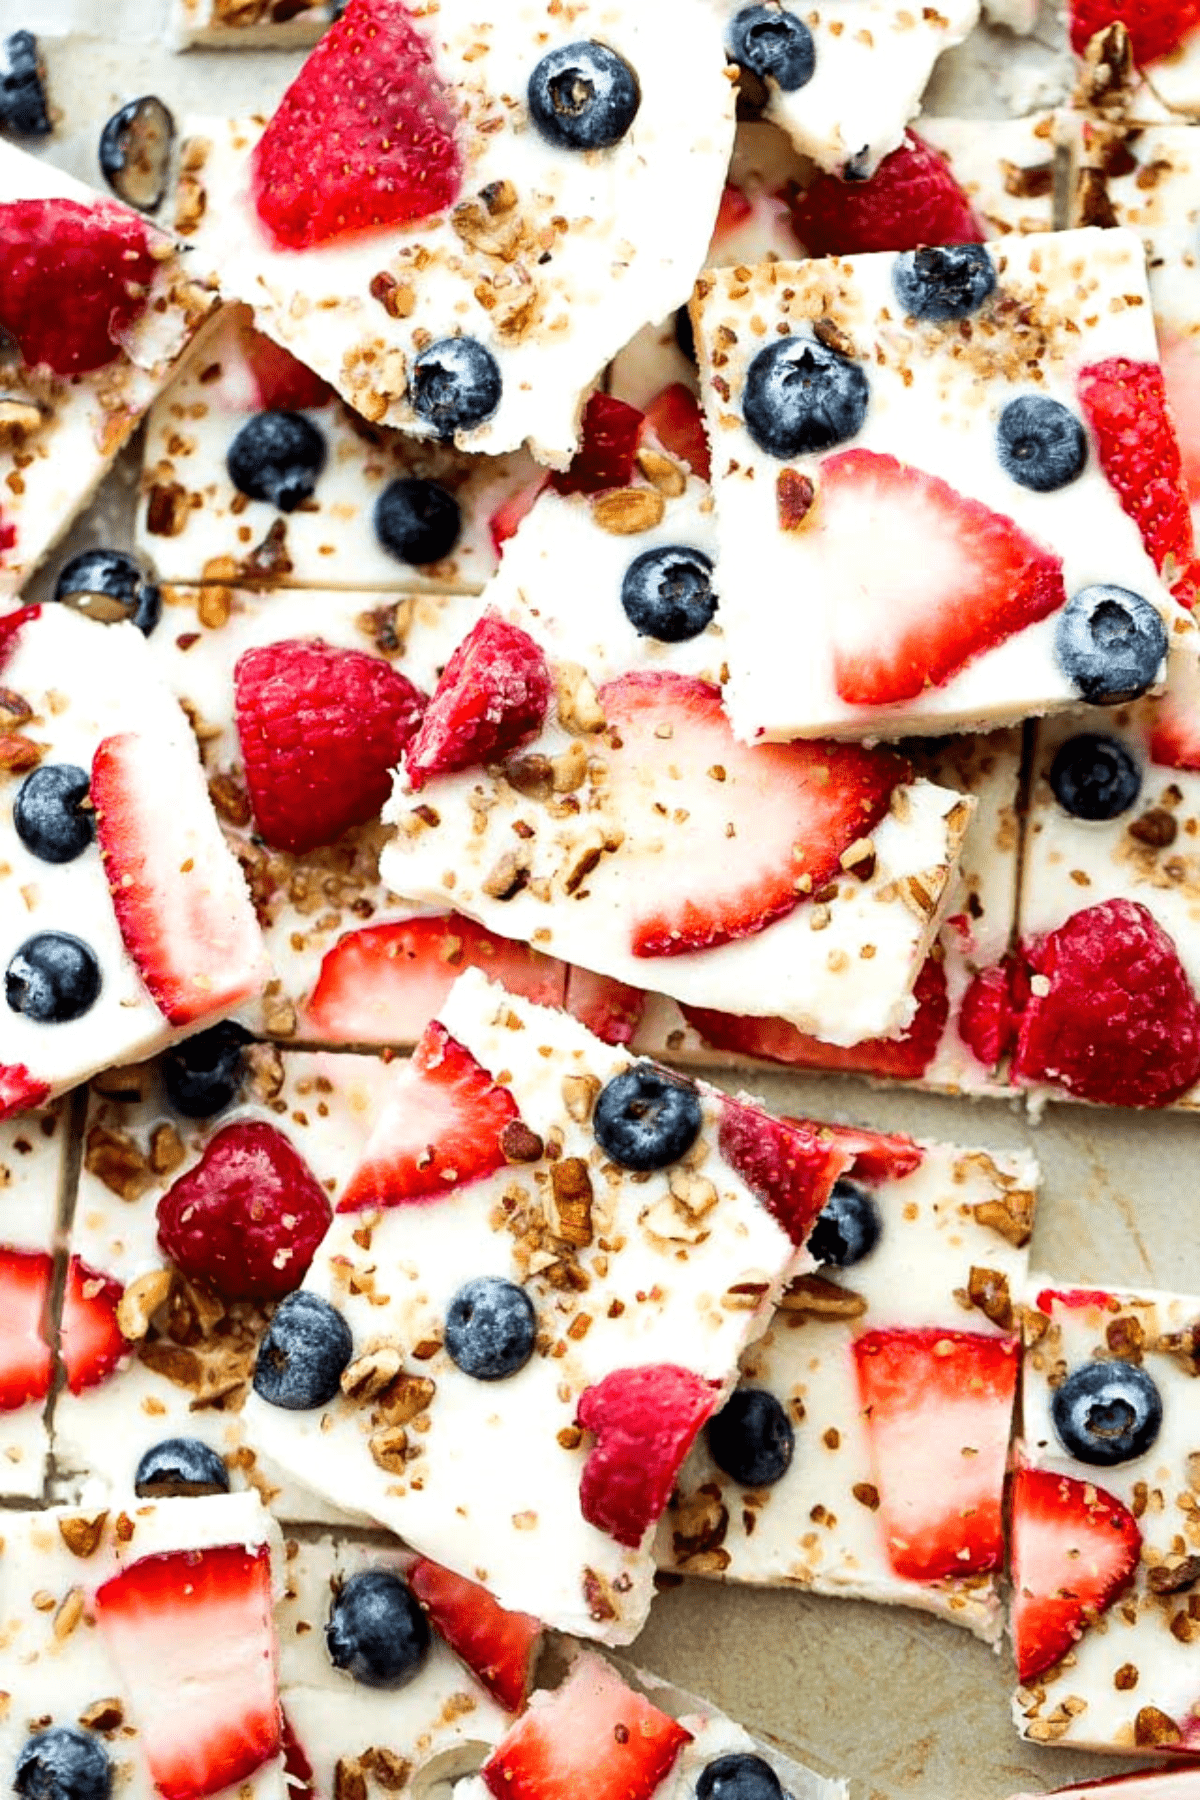 Frozen yogurt topped with blue and red berries and broken into squares.